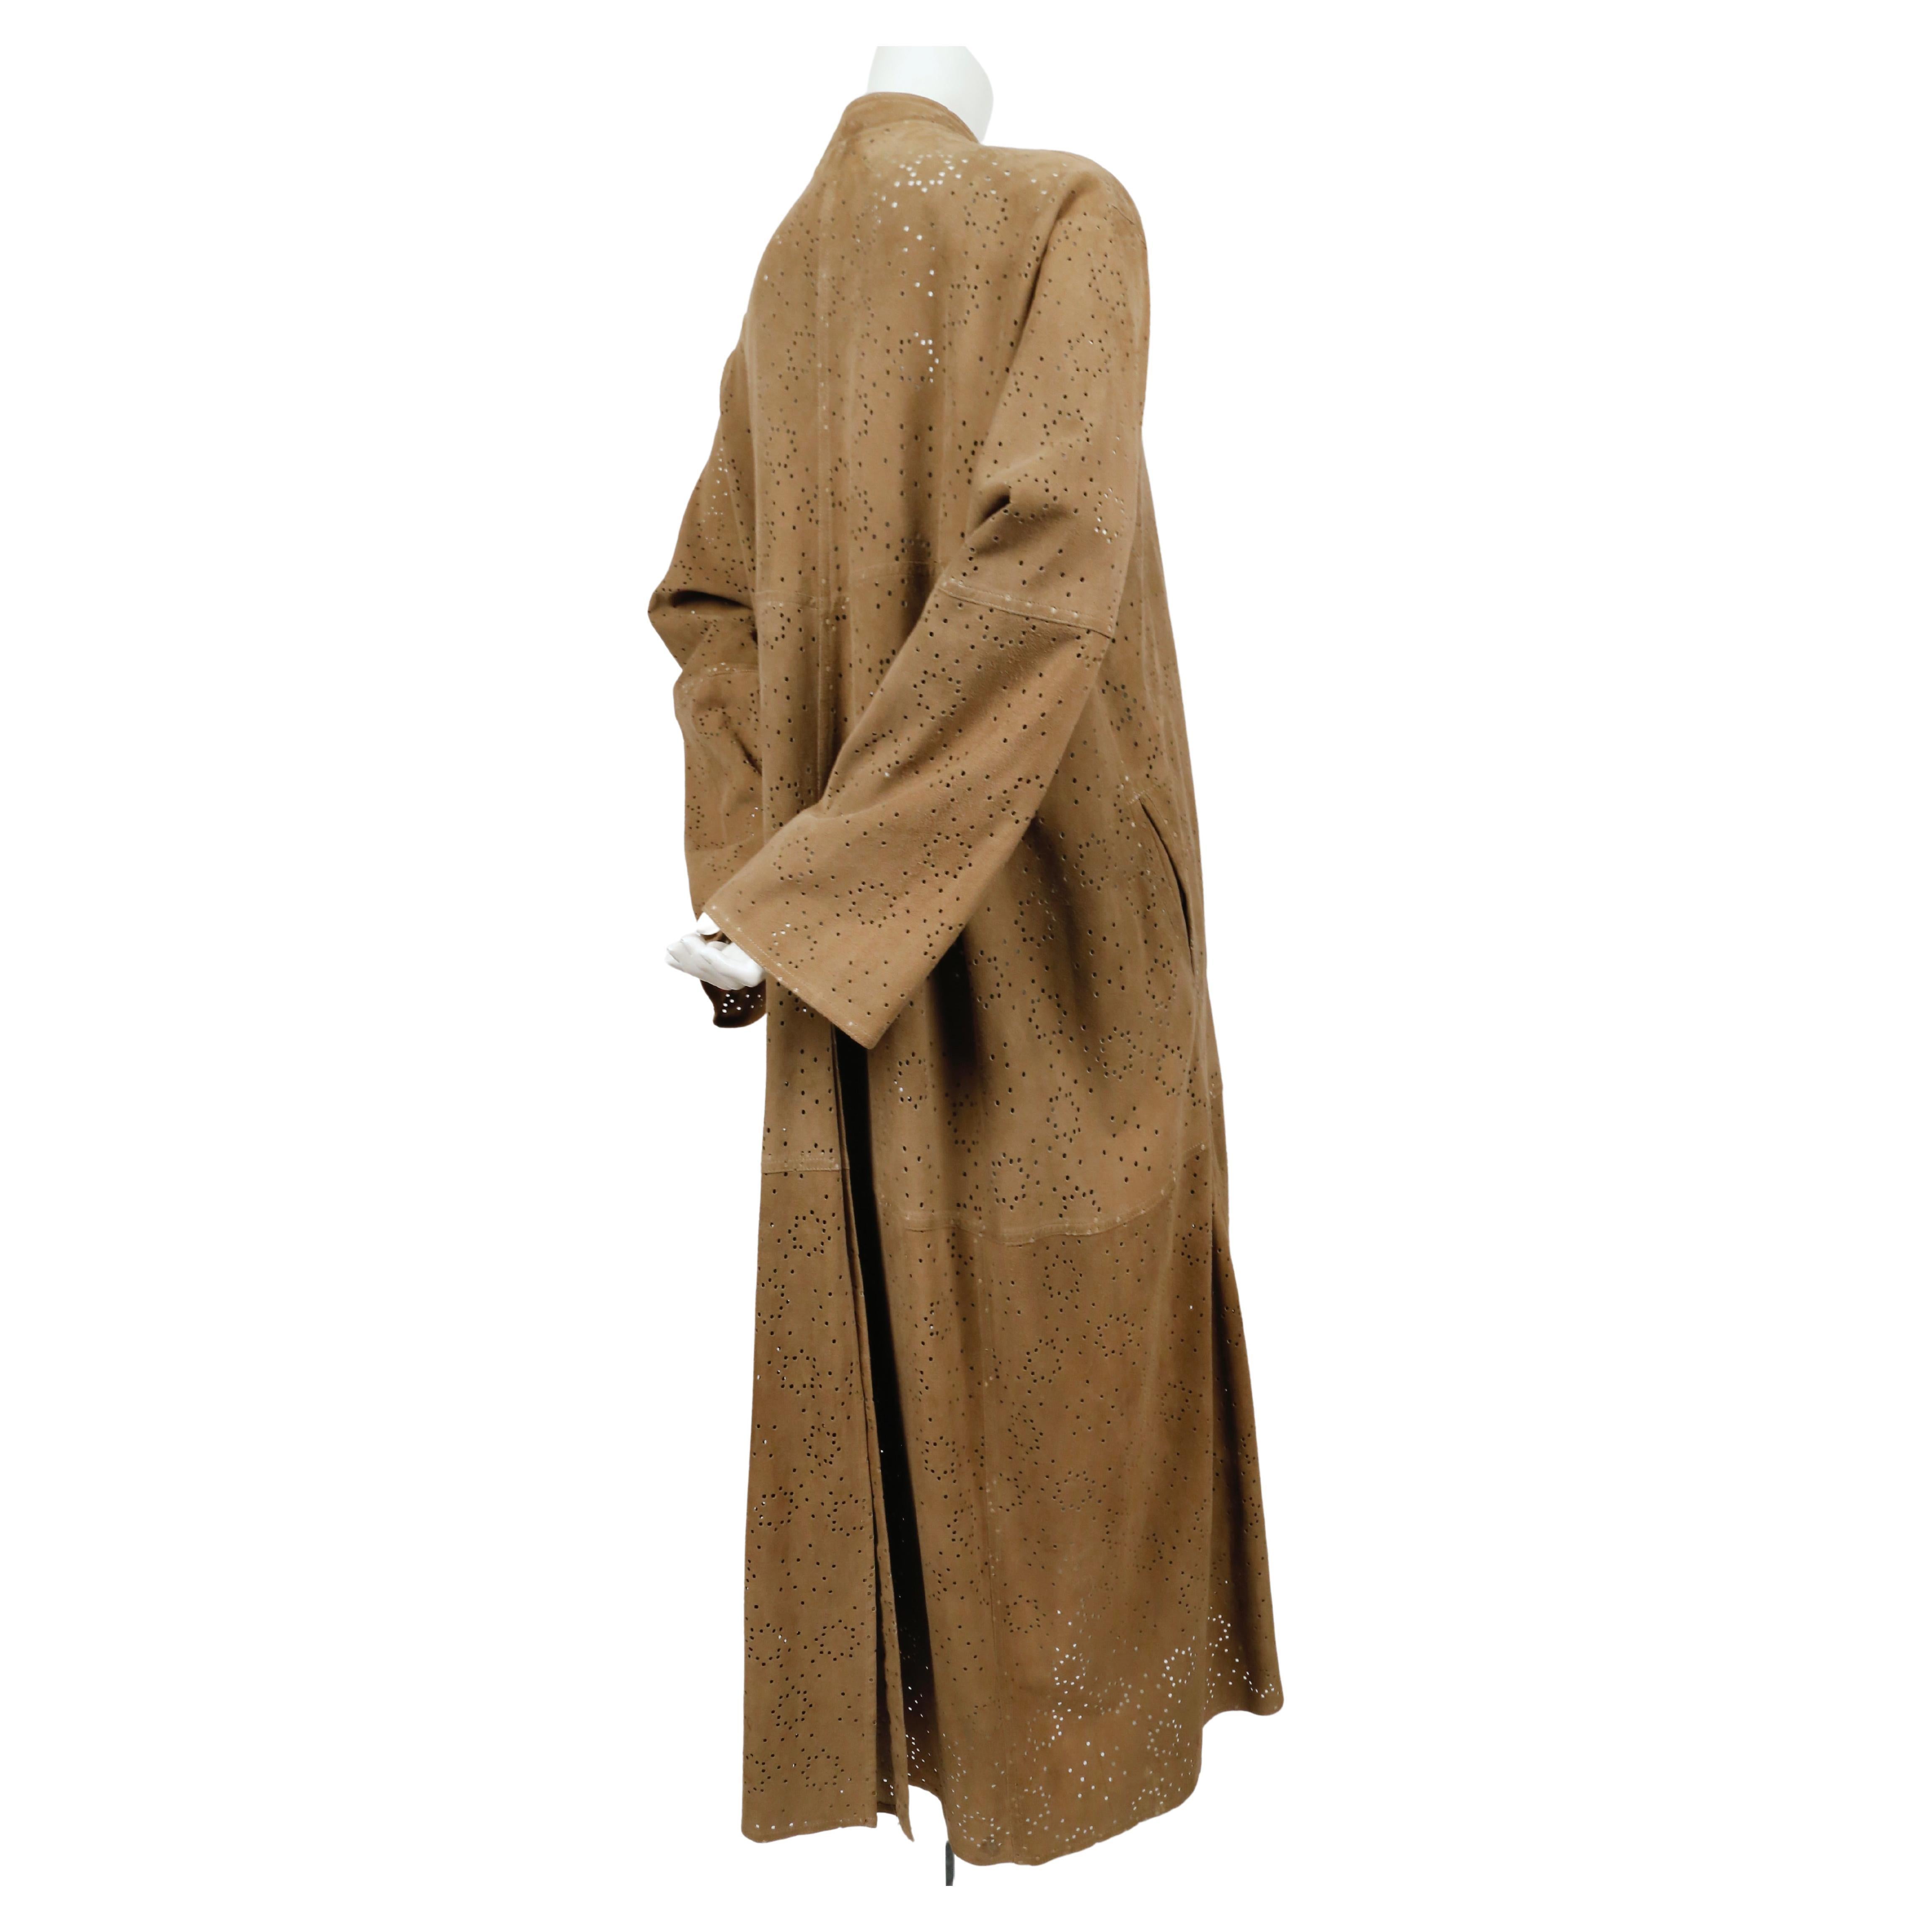 Very rare, tan suede, laser-cut coat from Azzedine Alaia dating to spring of 1988. Labeled a size 36 however due to the oversized cut, this coat fits many sizes. Approximate measurements: drop shoulder 19